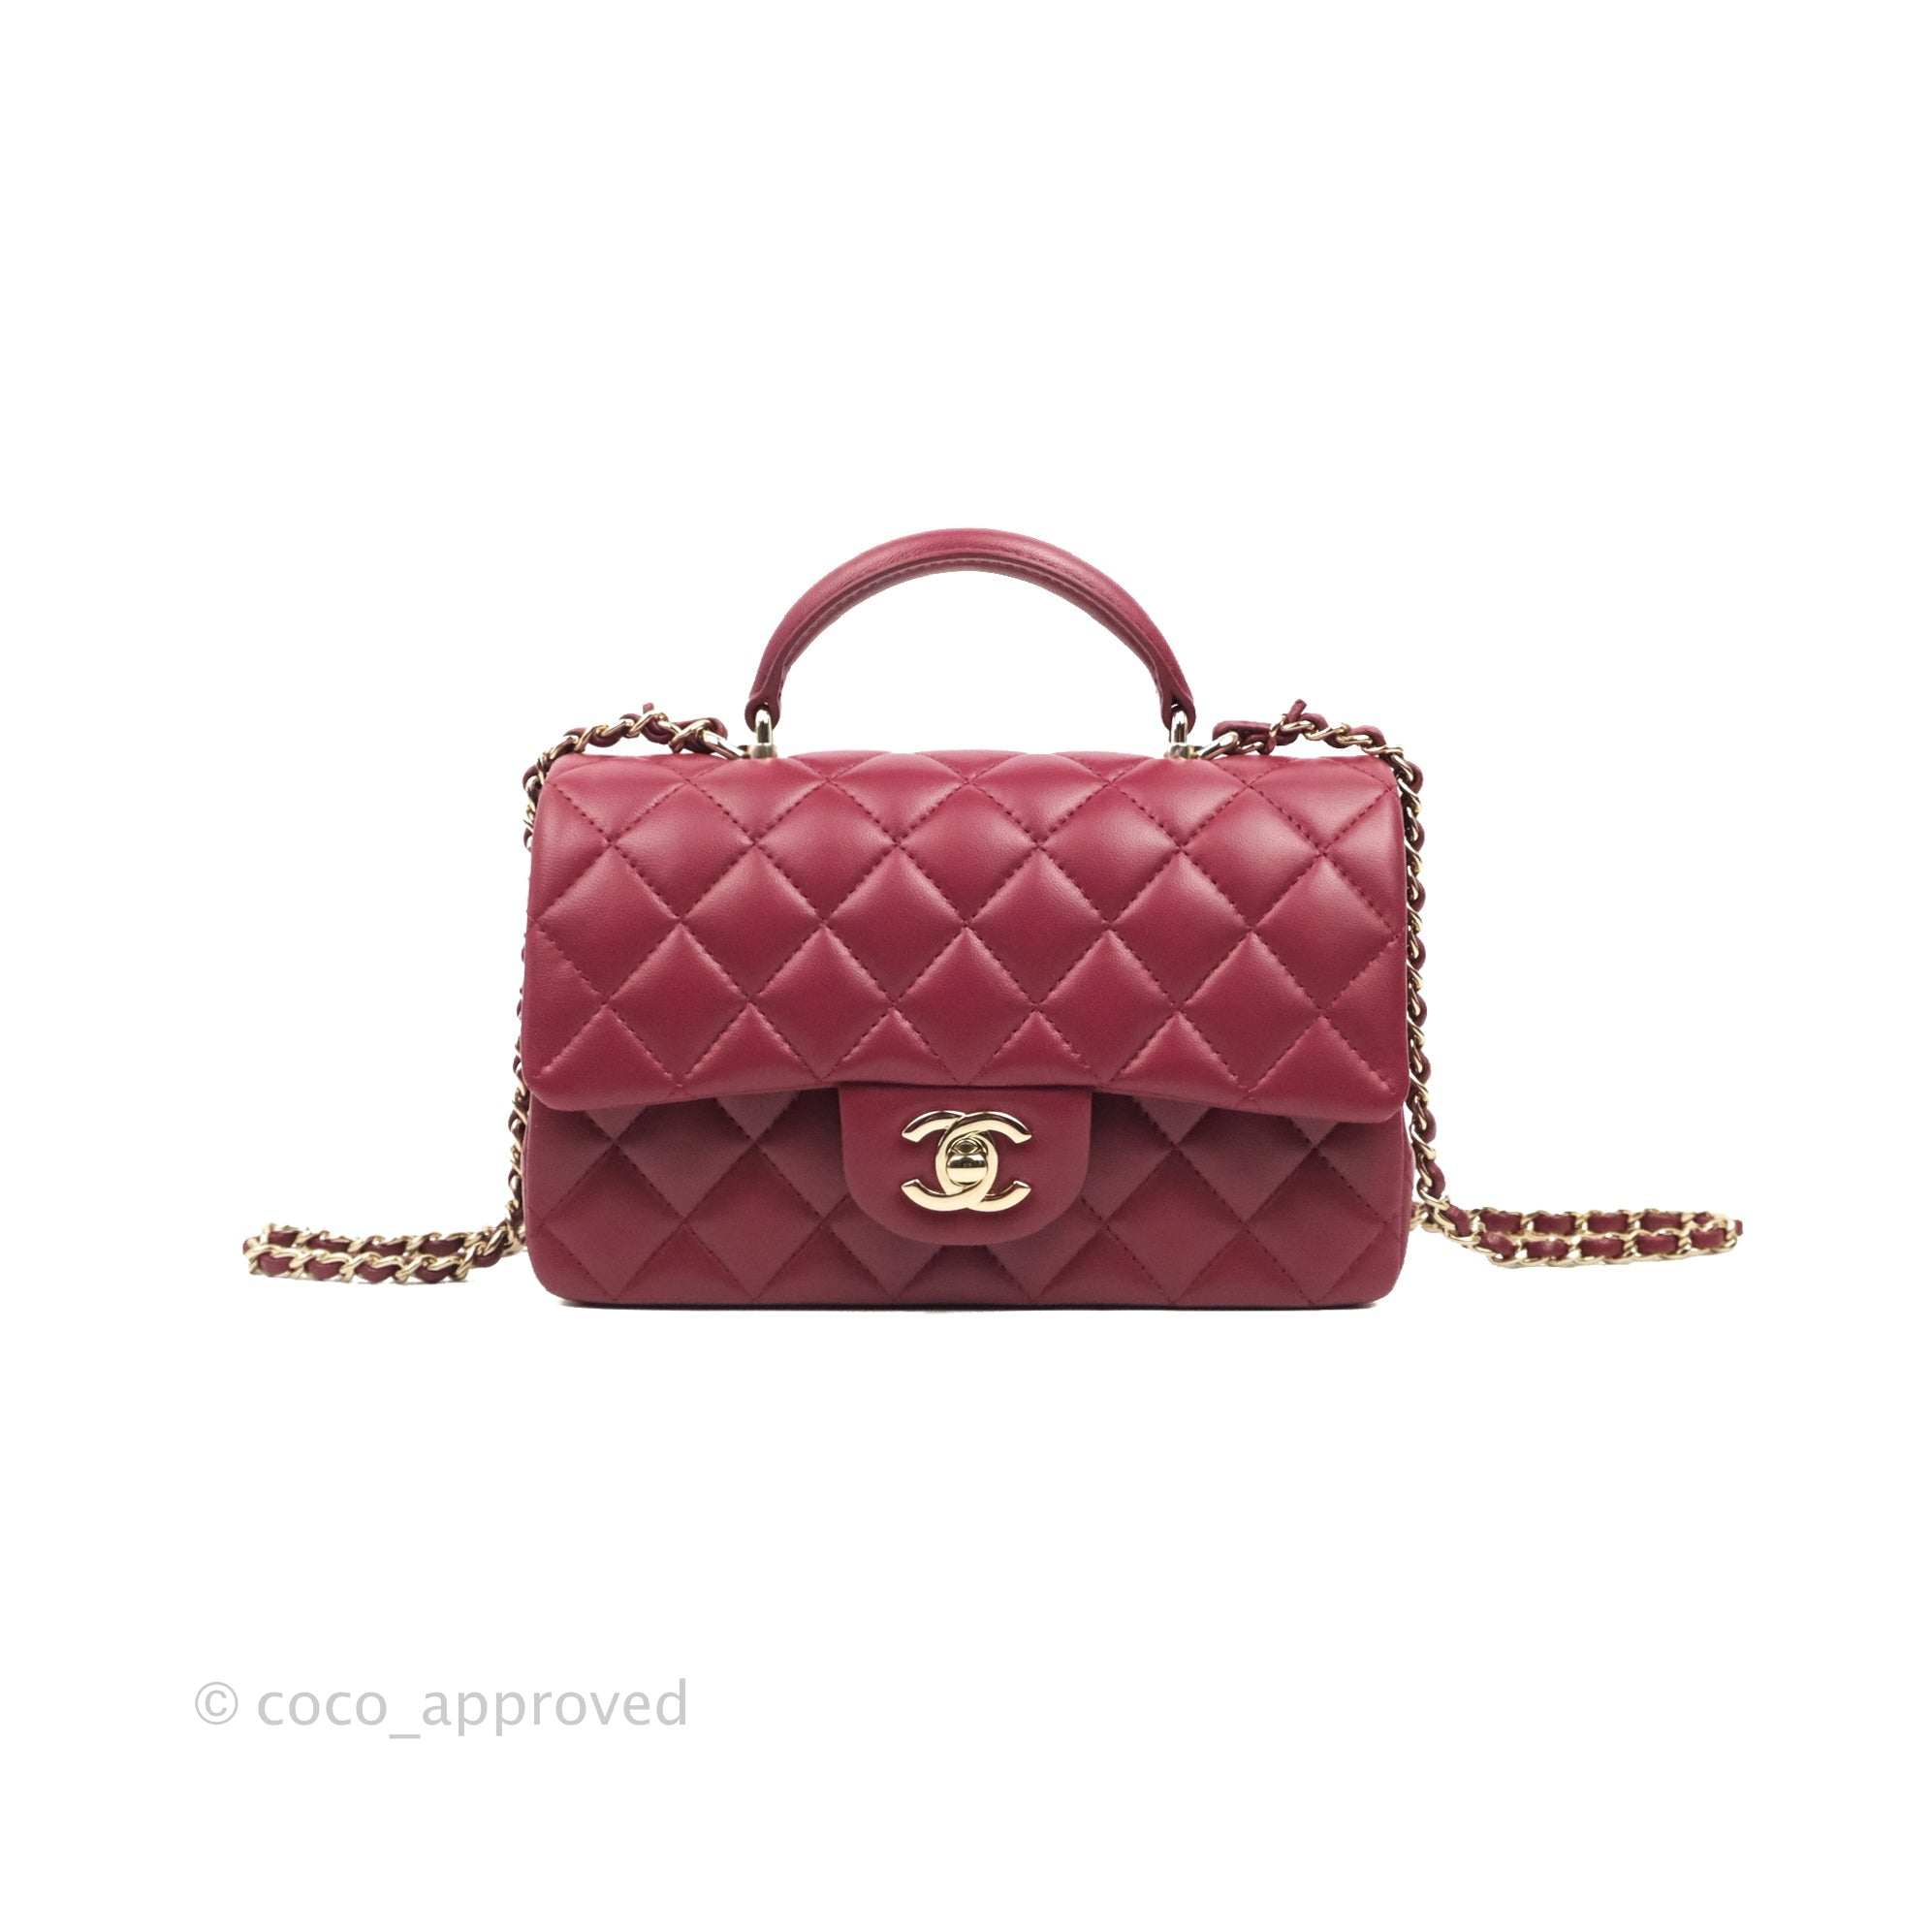 chanel red top handle bag